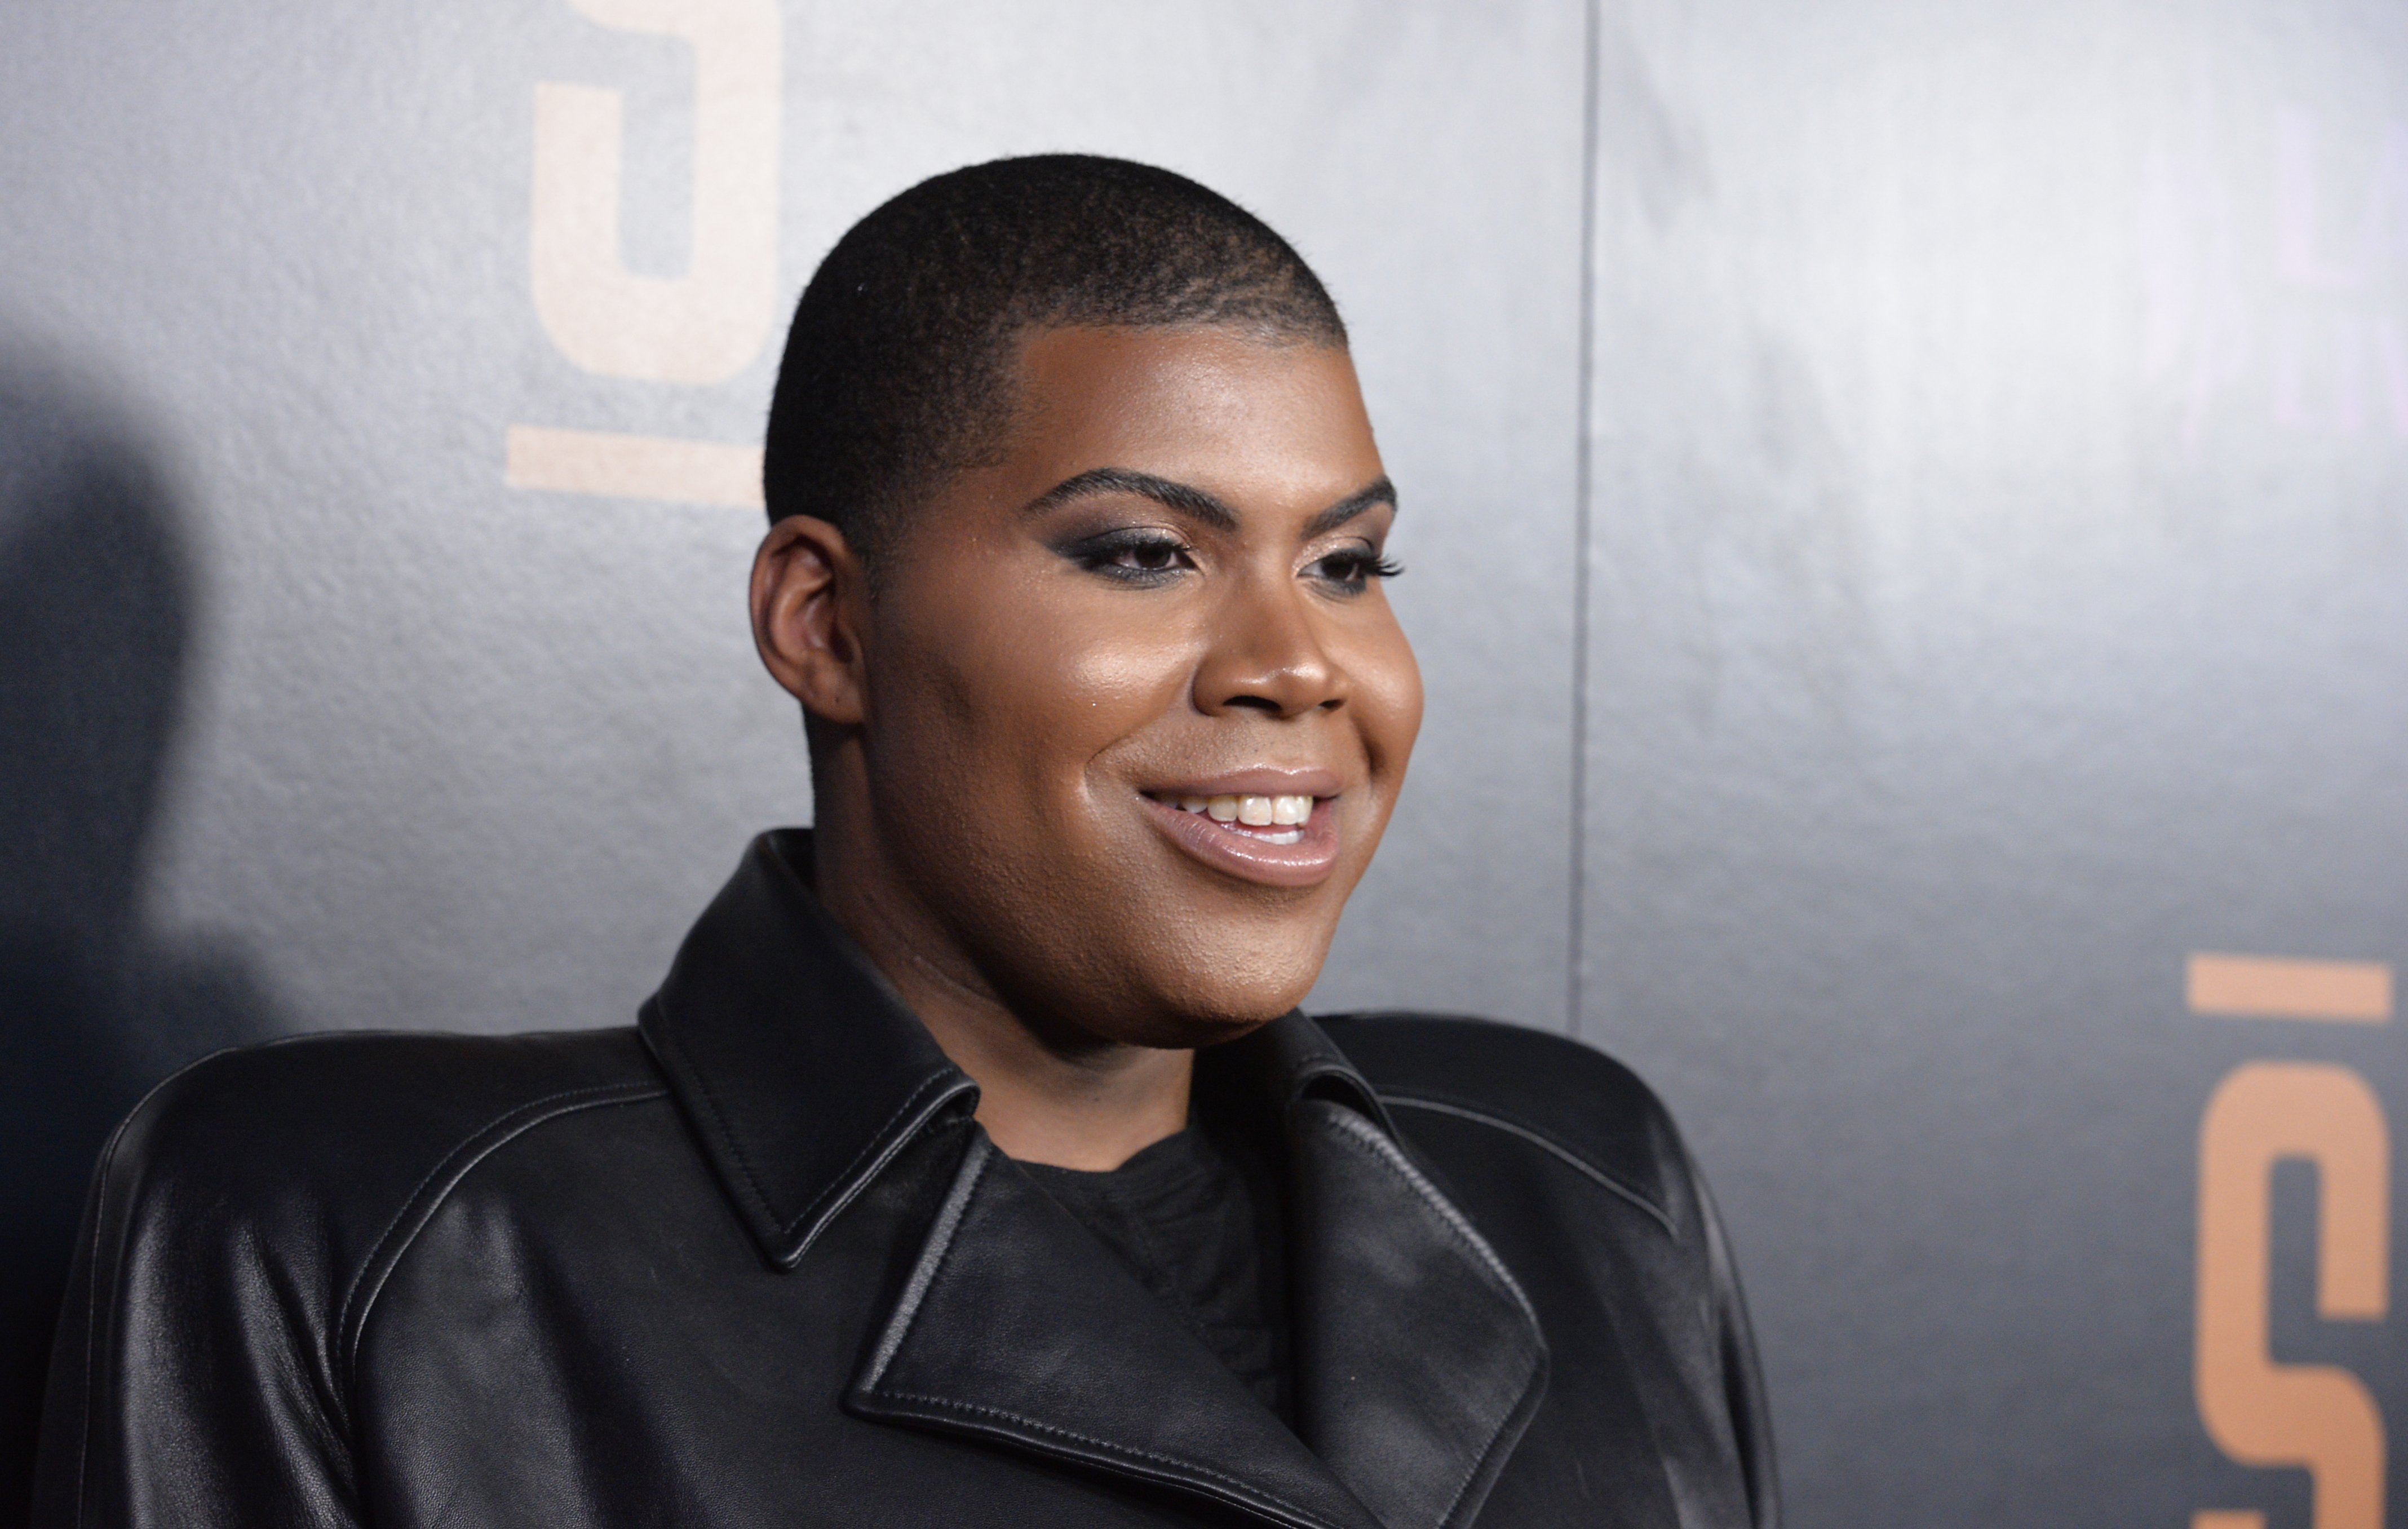 EJ Johnson at the grand opening of Shaquille's on March 09, 2019 in California | Photo: Getty Images